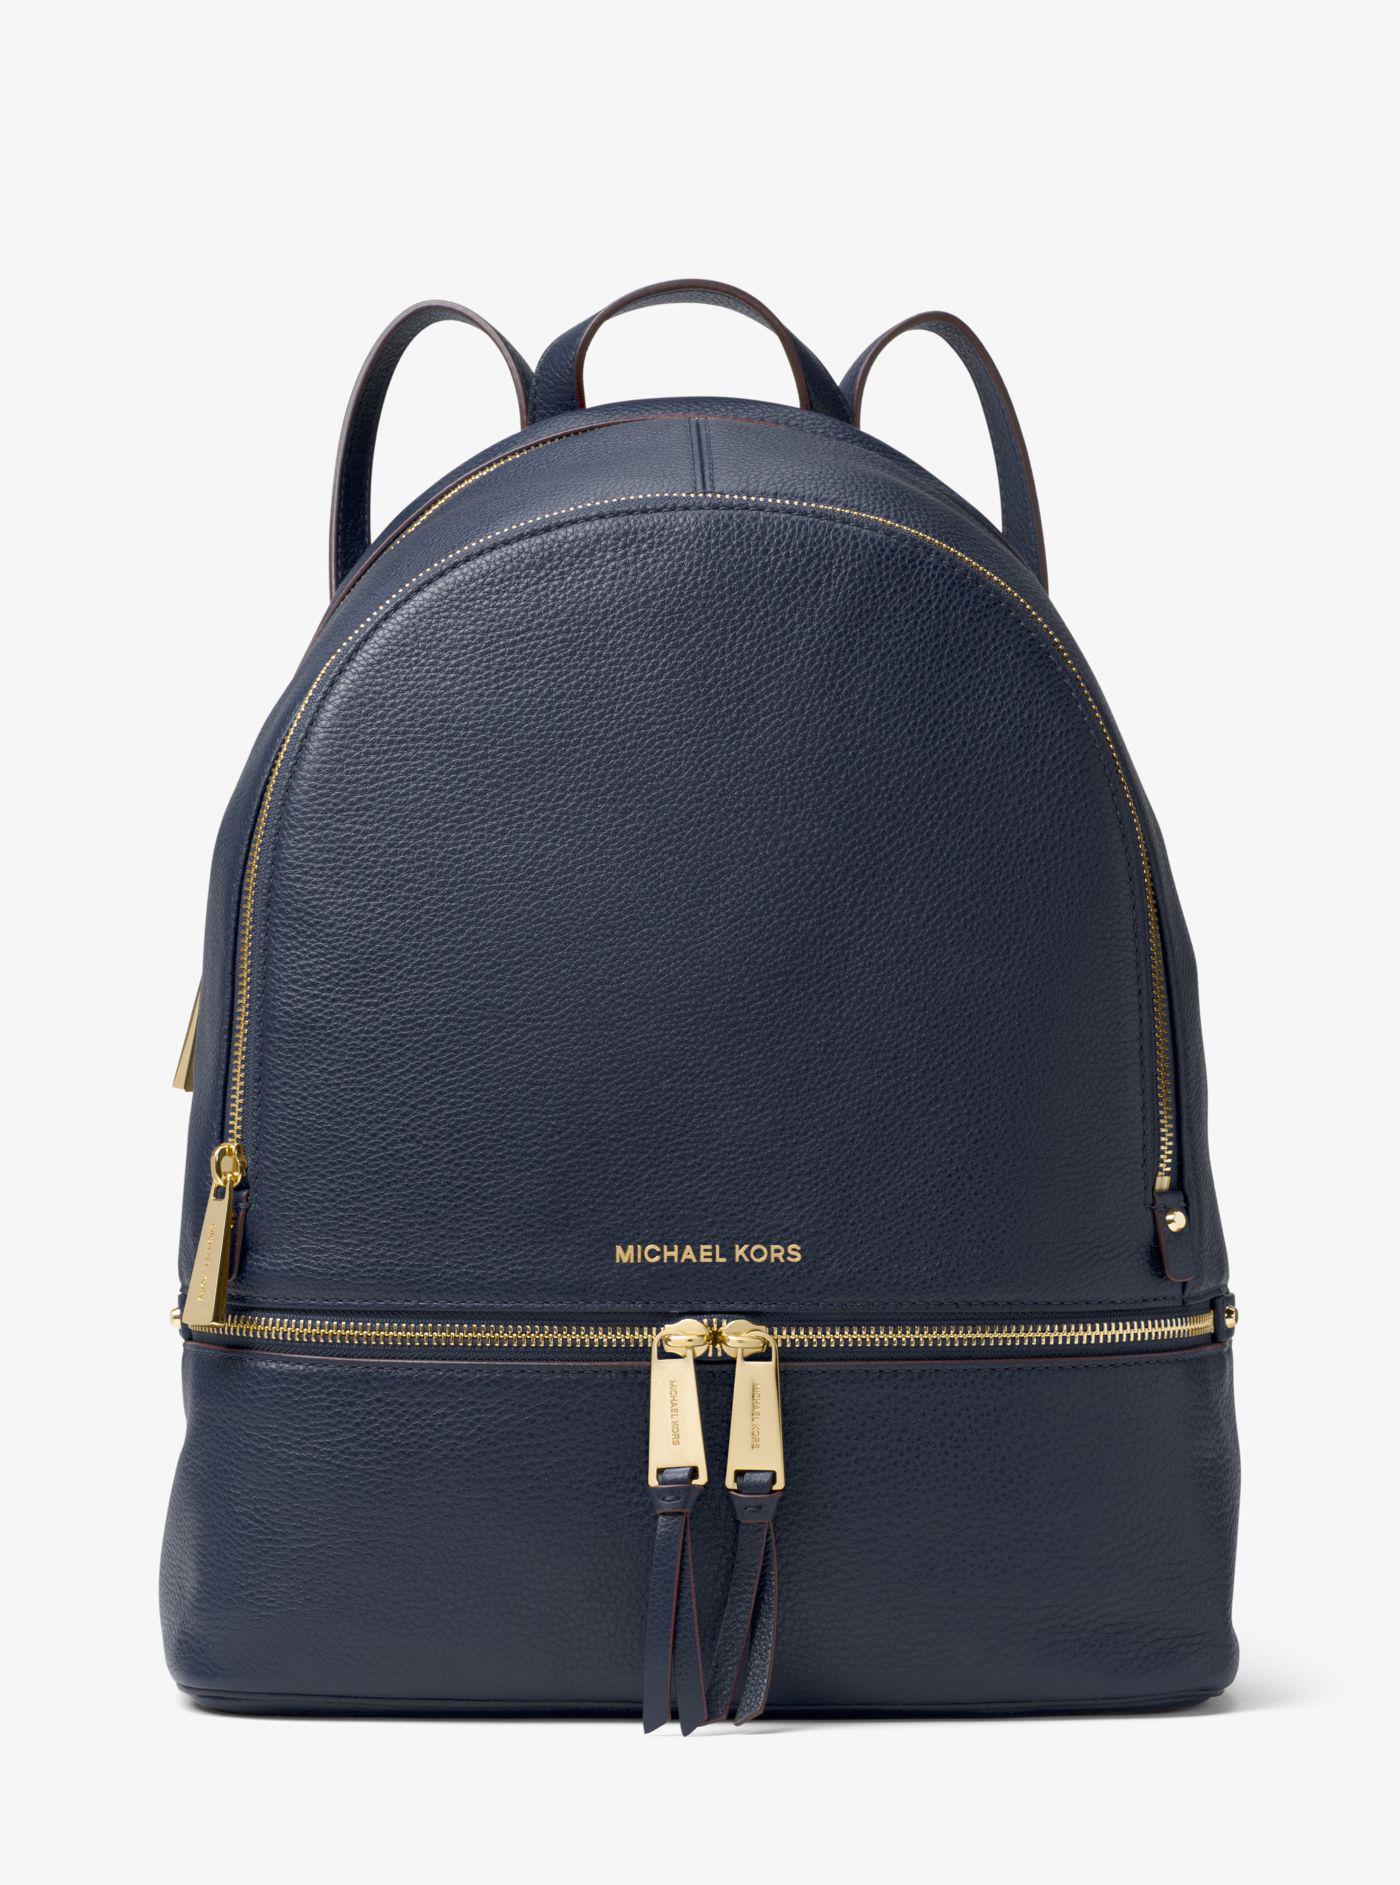 Michael Kors Leather Backpack For Women in Navy (Blue) - Lyst